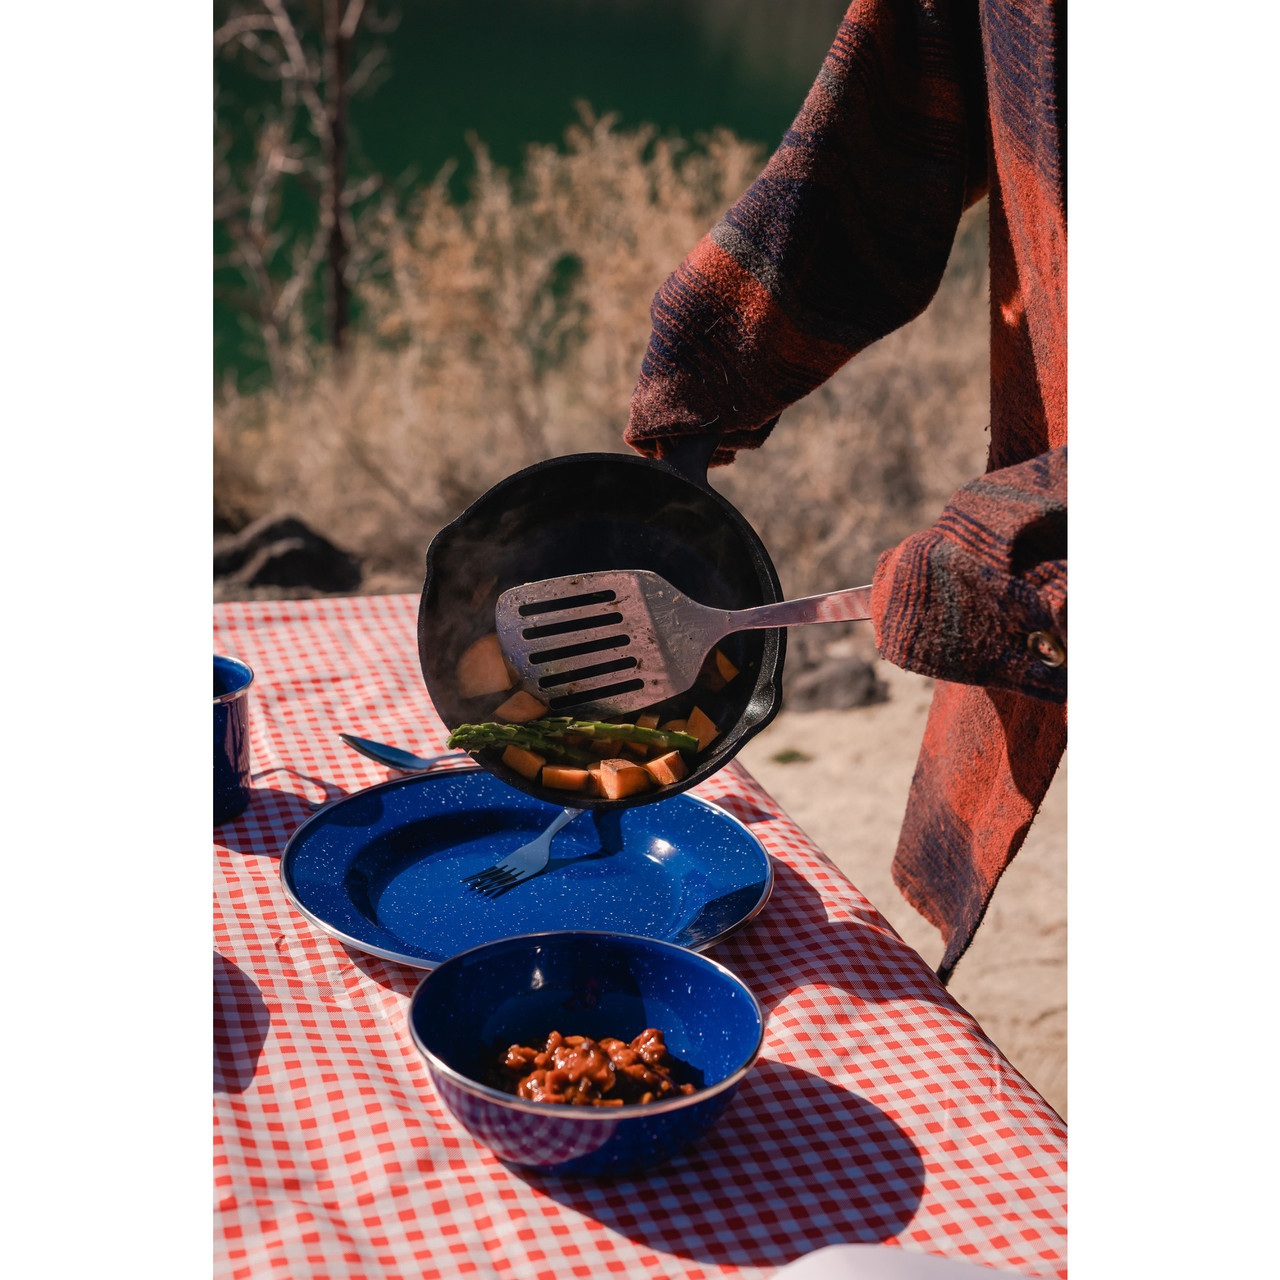 Stainless Steel Cooking Utensils - Stansport